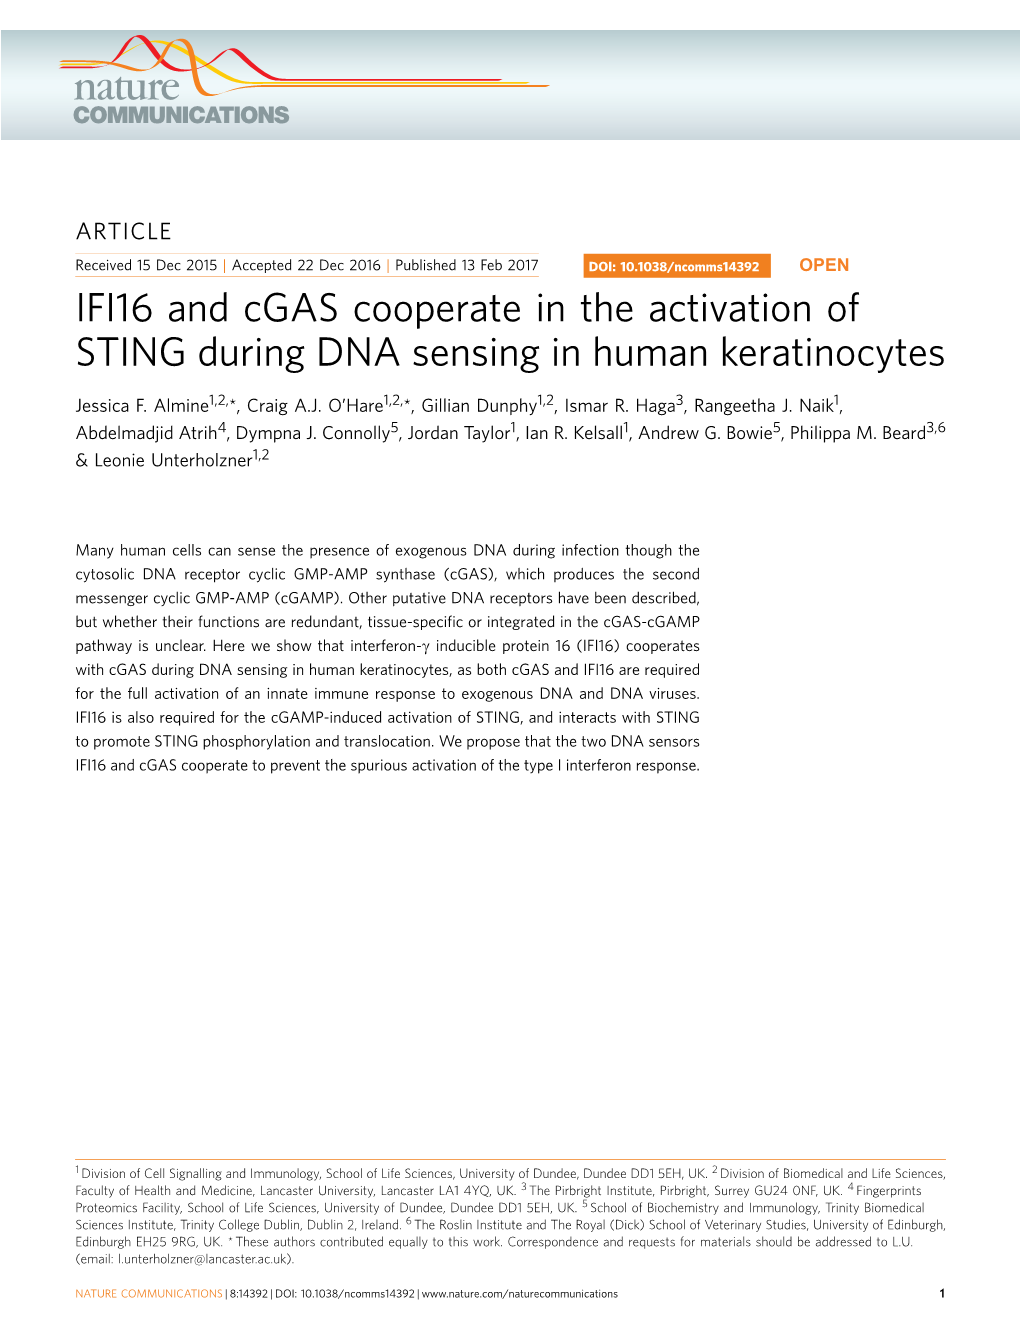 IFI16 and Cgas Cooperate in the Activation of STING During DNA Sensing in Human Keratinocytes